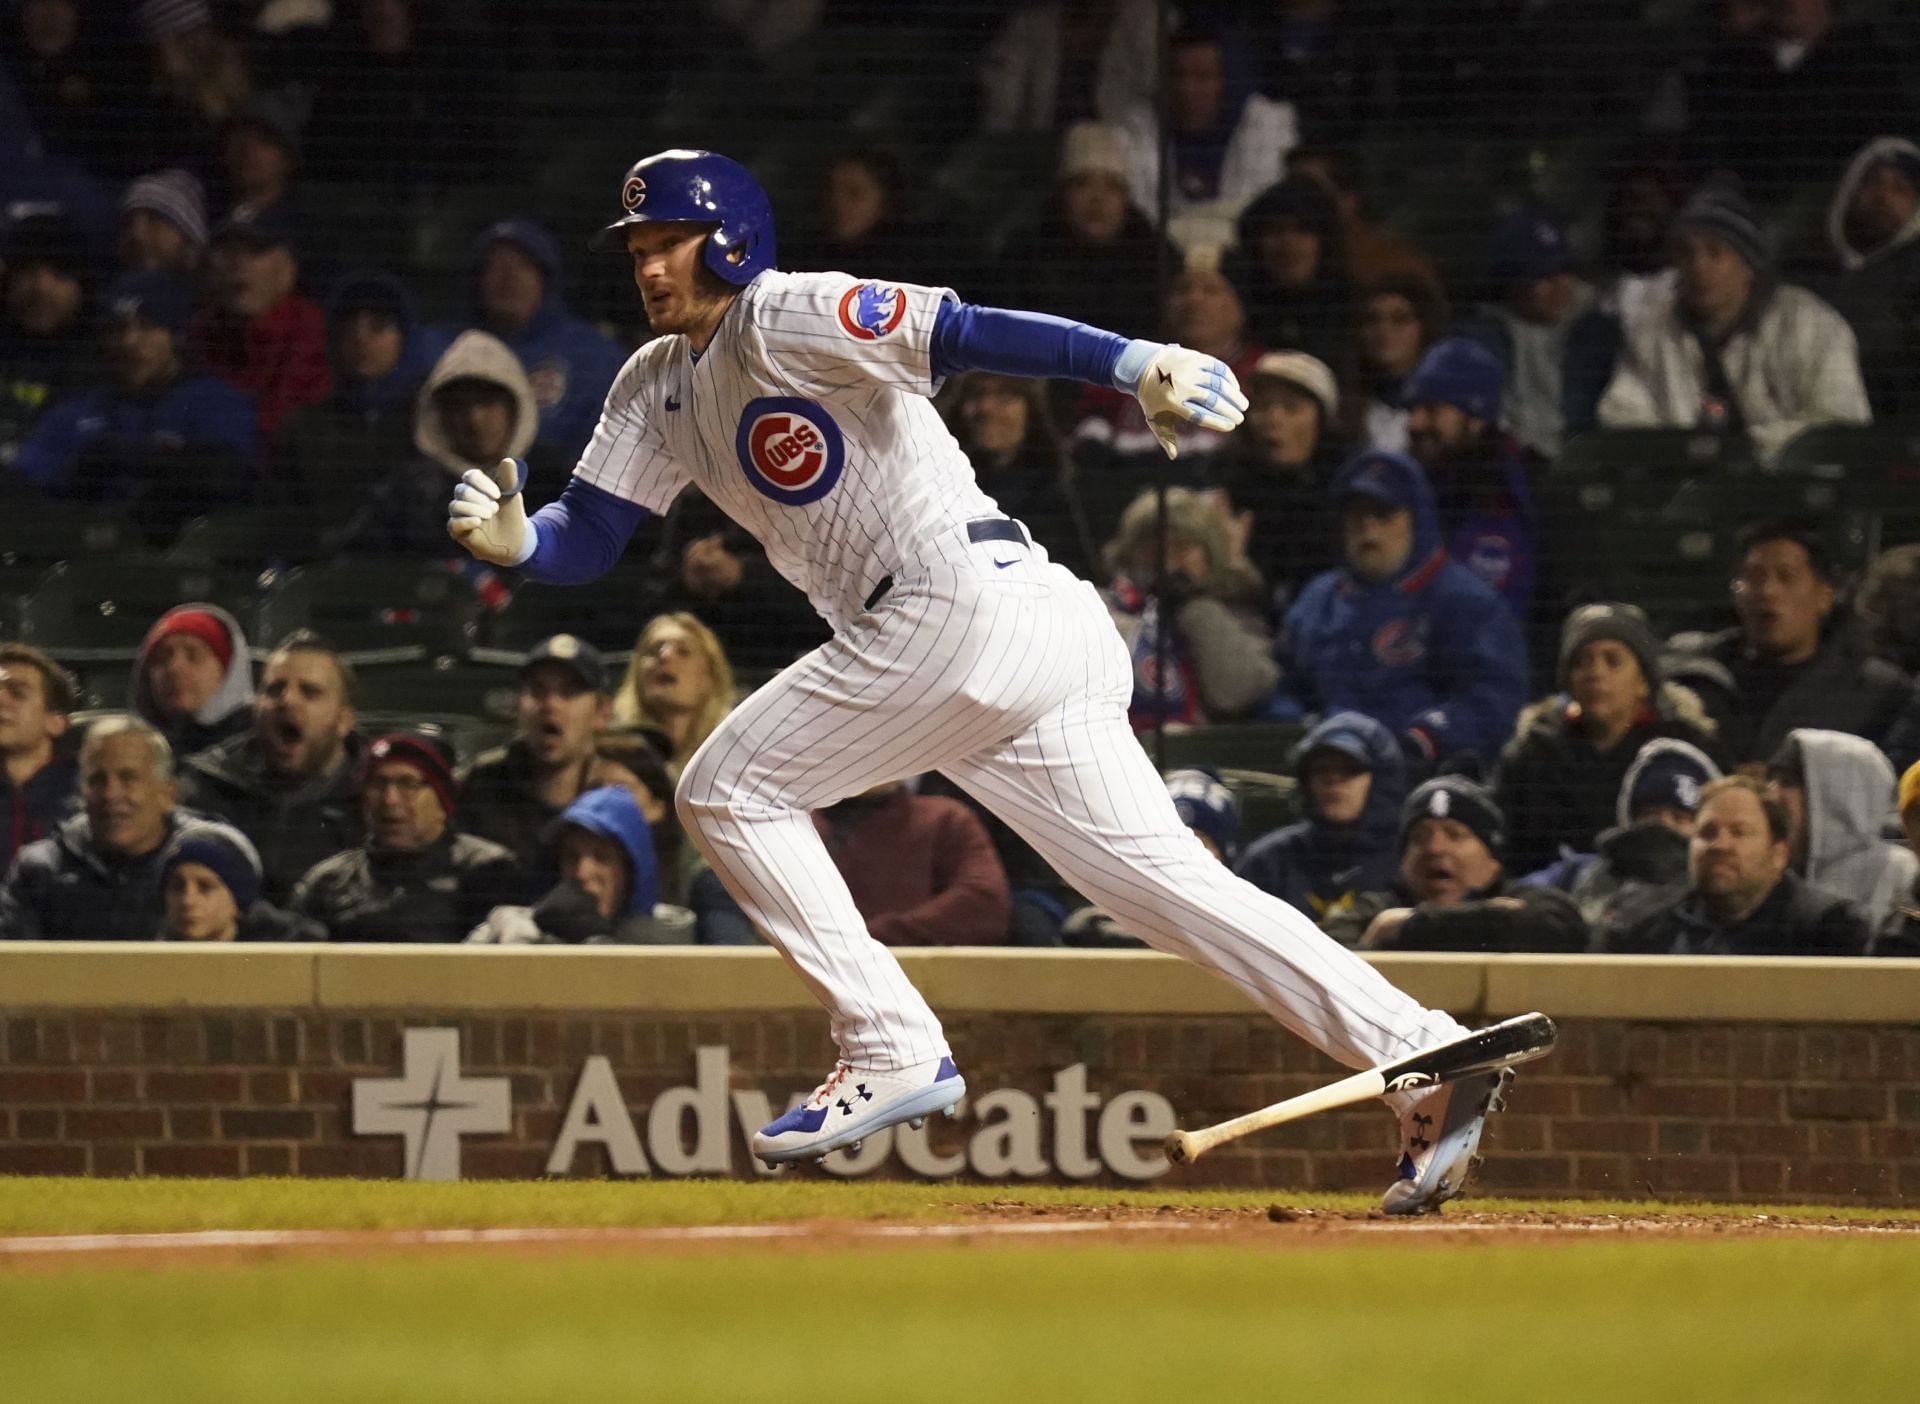 Chicago Cubs outfielder Ian Happ